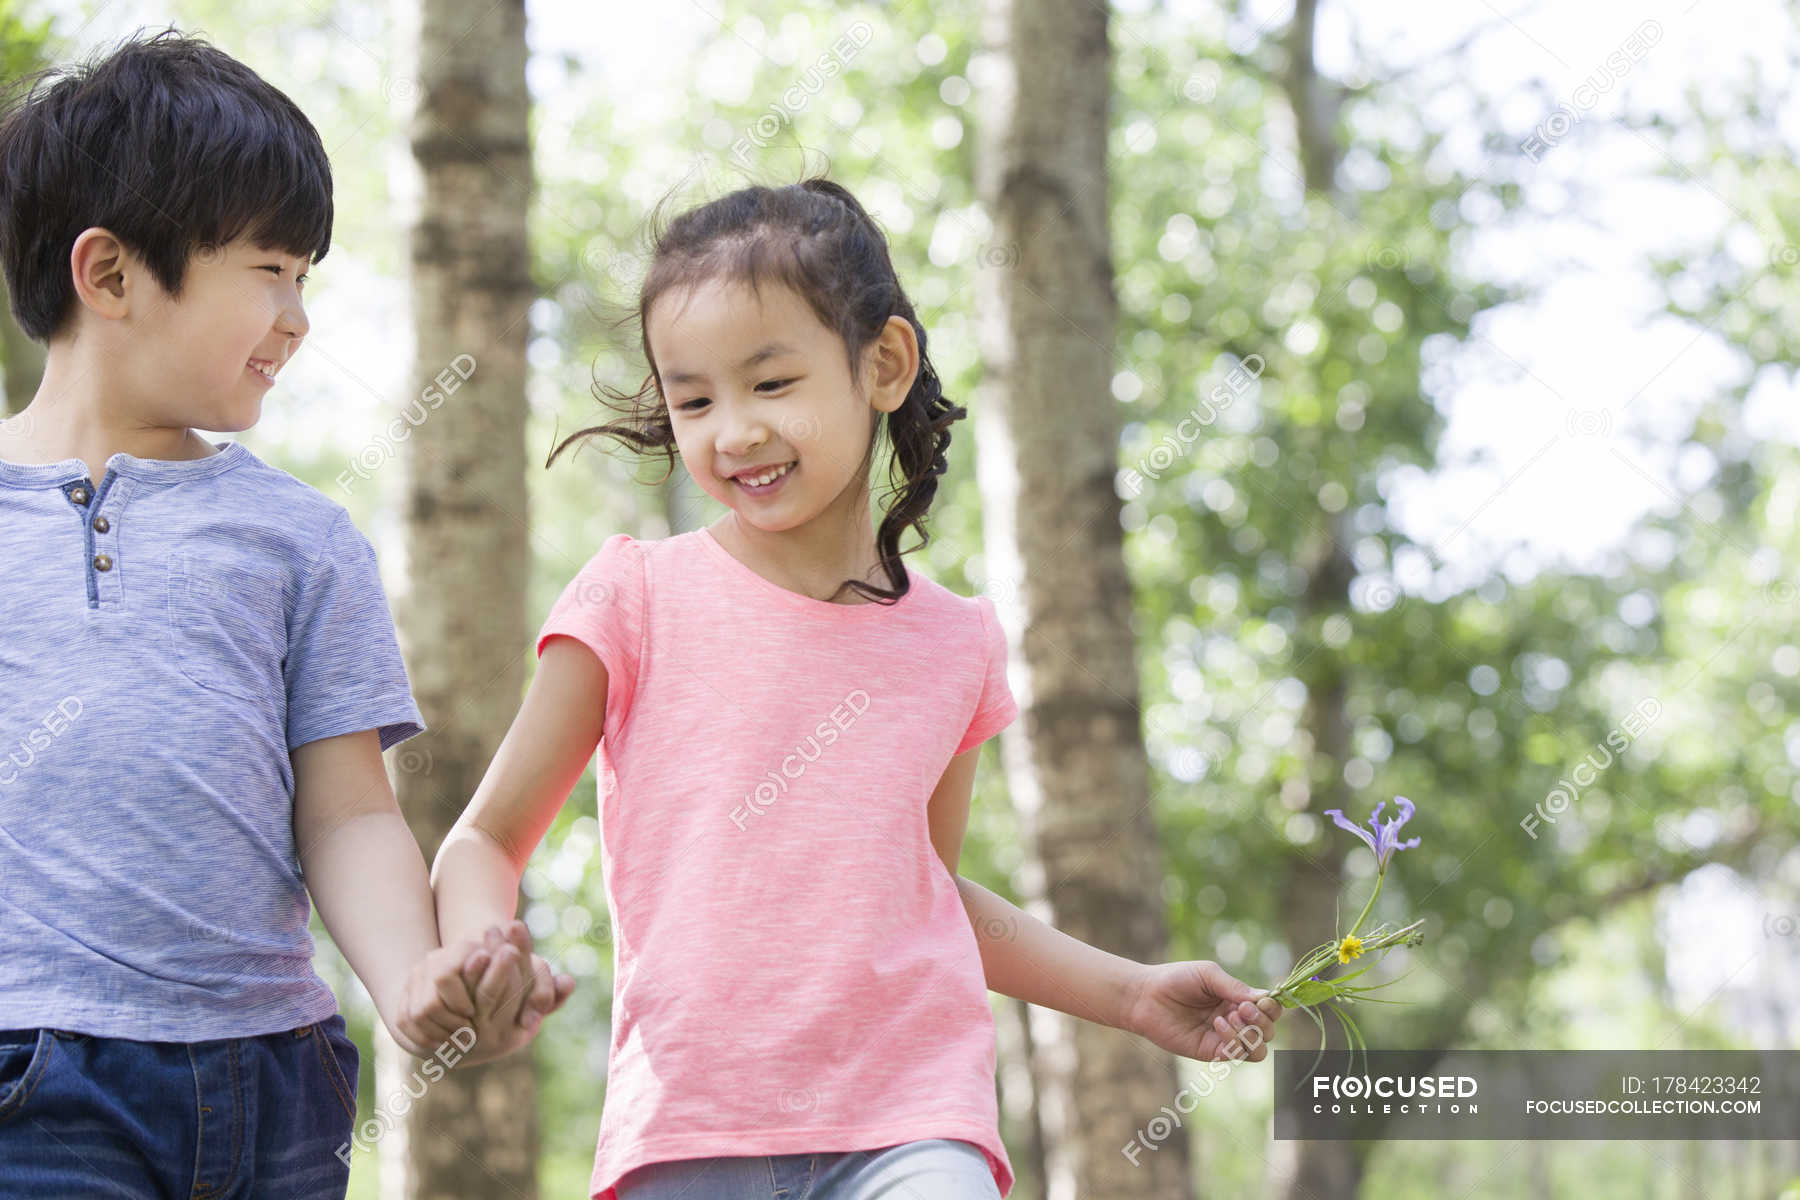 Chinese Boy And Girl Holding Hands Walking In Woods Forest Friendship Stock Photo